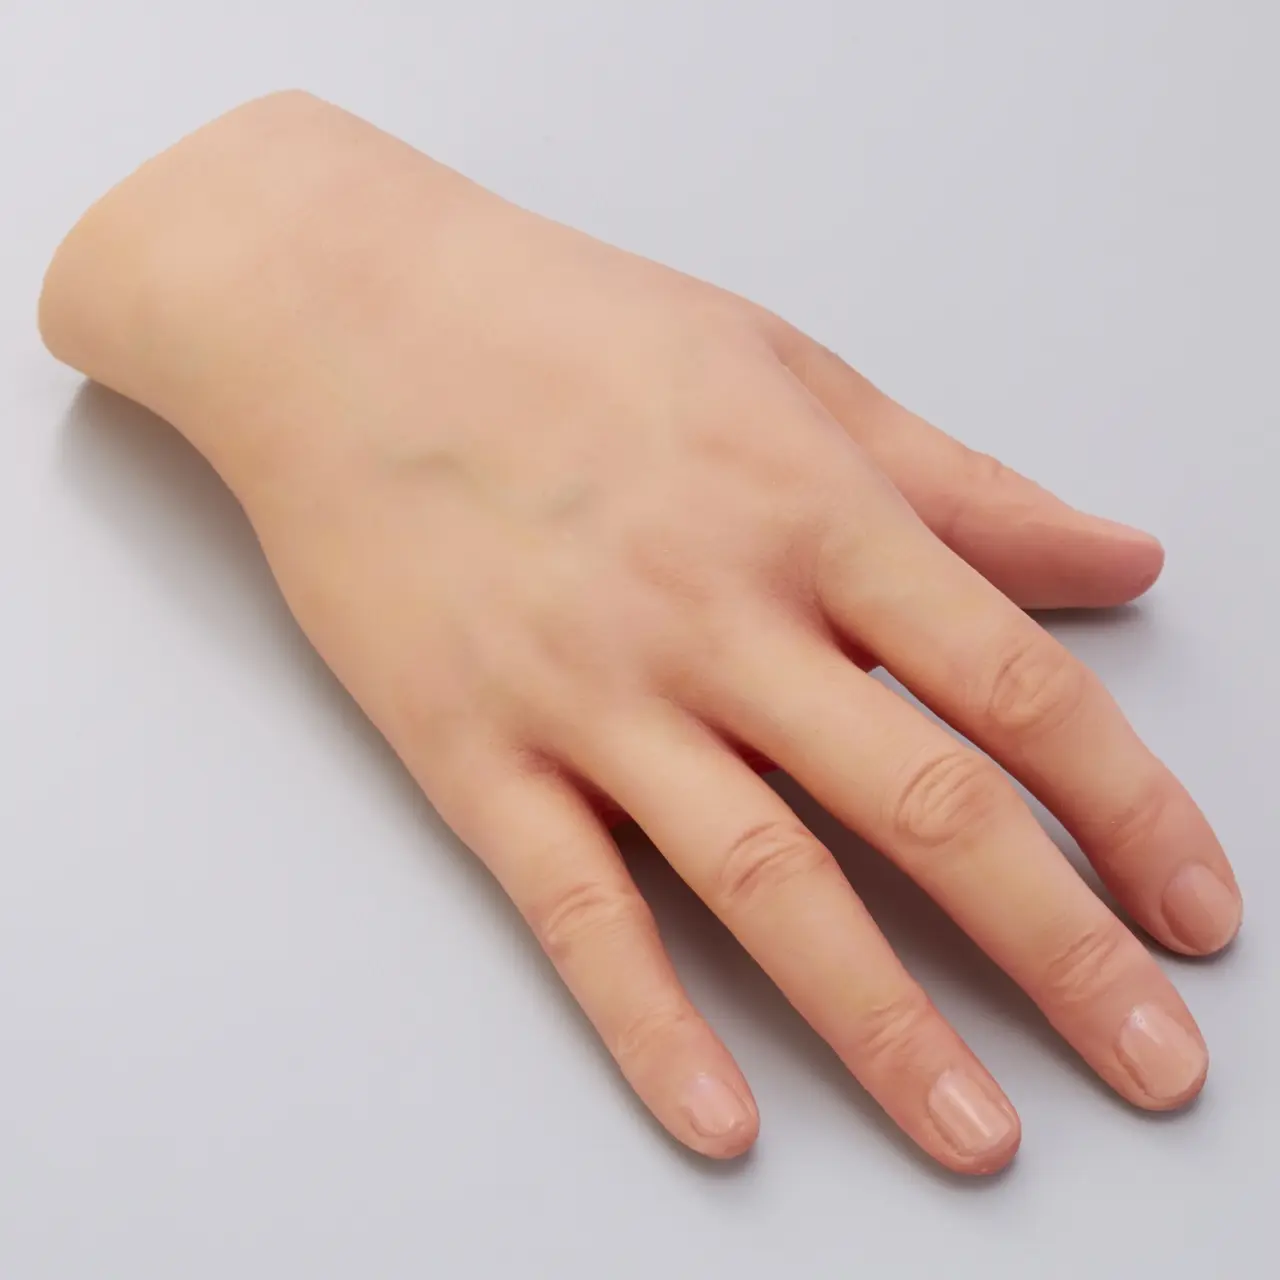 Dermal model of the back of the hand